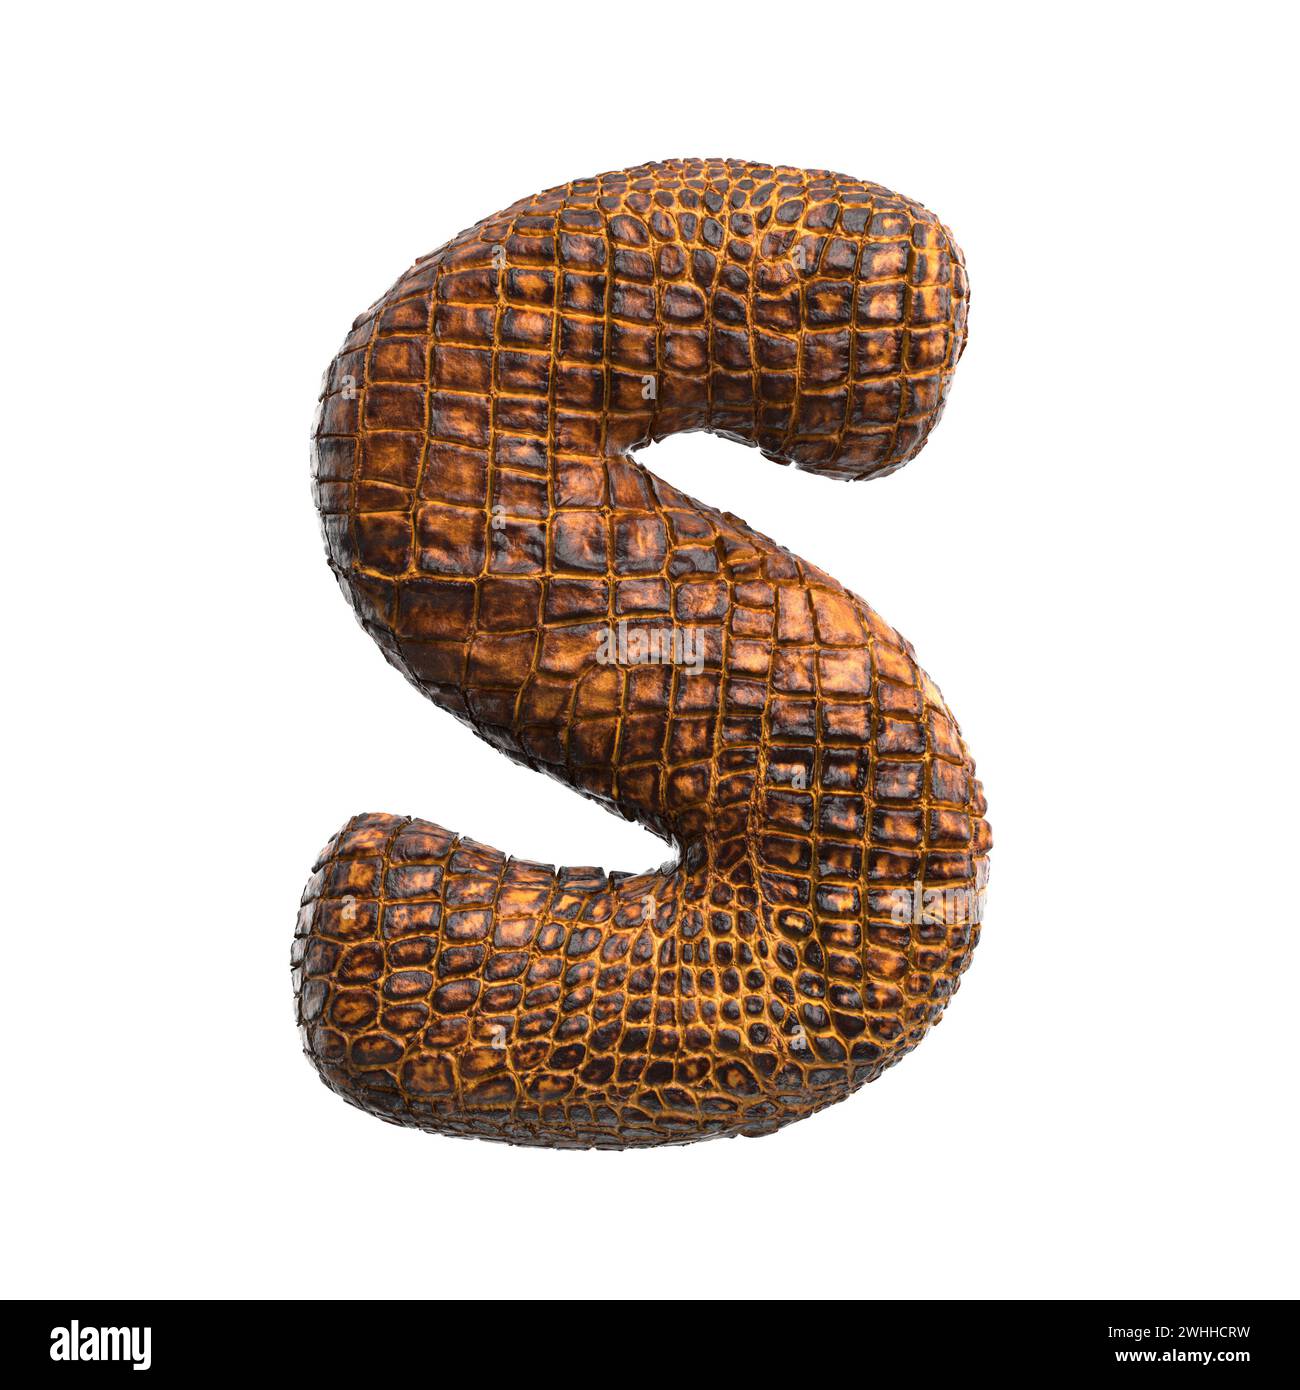 Crocodile letter S - Uppercase 3d reptile font - suitable for wildlife, ecology or conservation related subjects Stock Photo